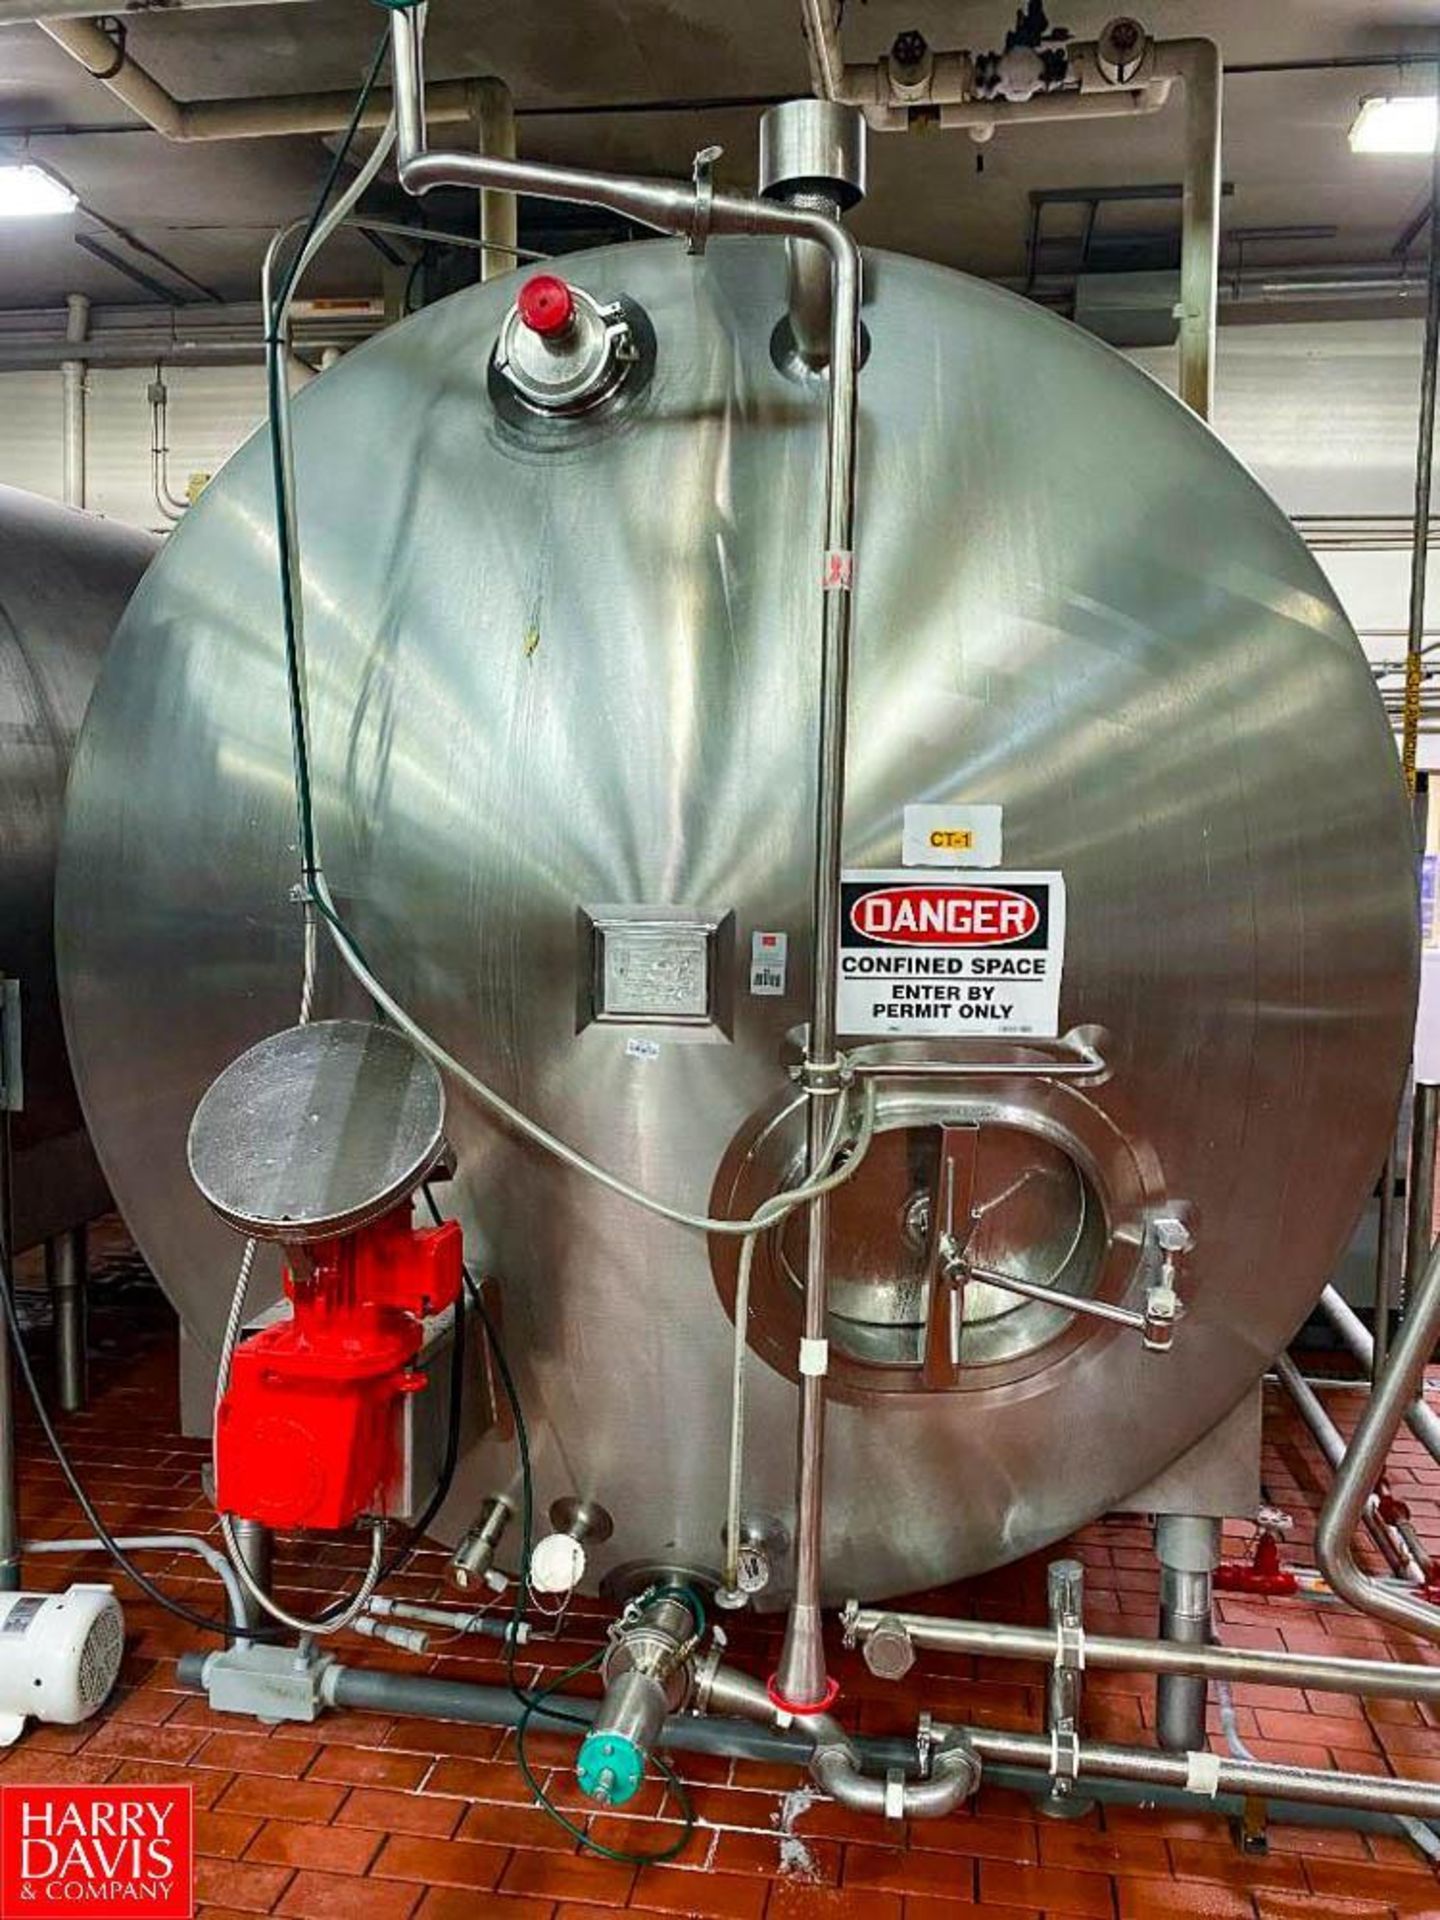 Feldmeier 4,200 Gallon All S/S Jacketed Tank with Horizontal Agitation, S/N A-329-03 (CT 1) - Image 2 of 3